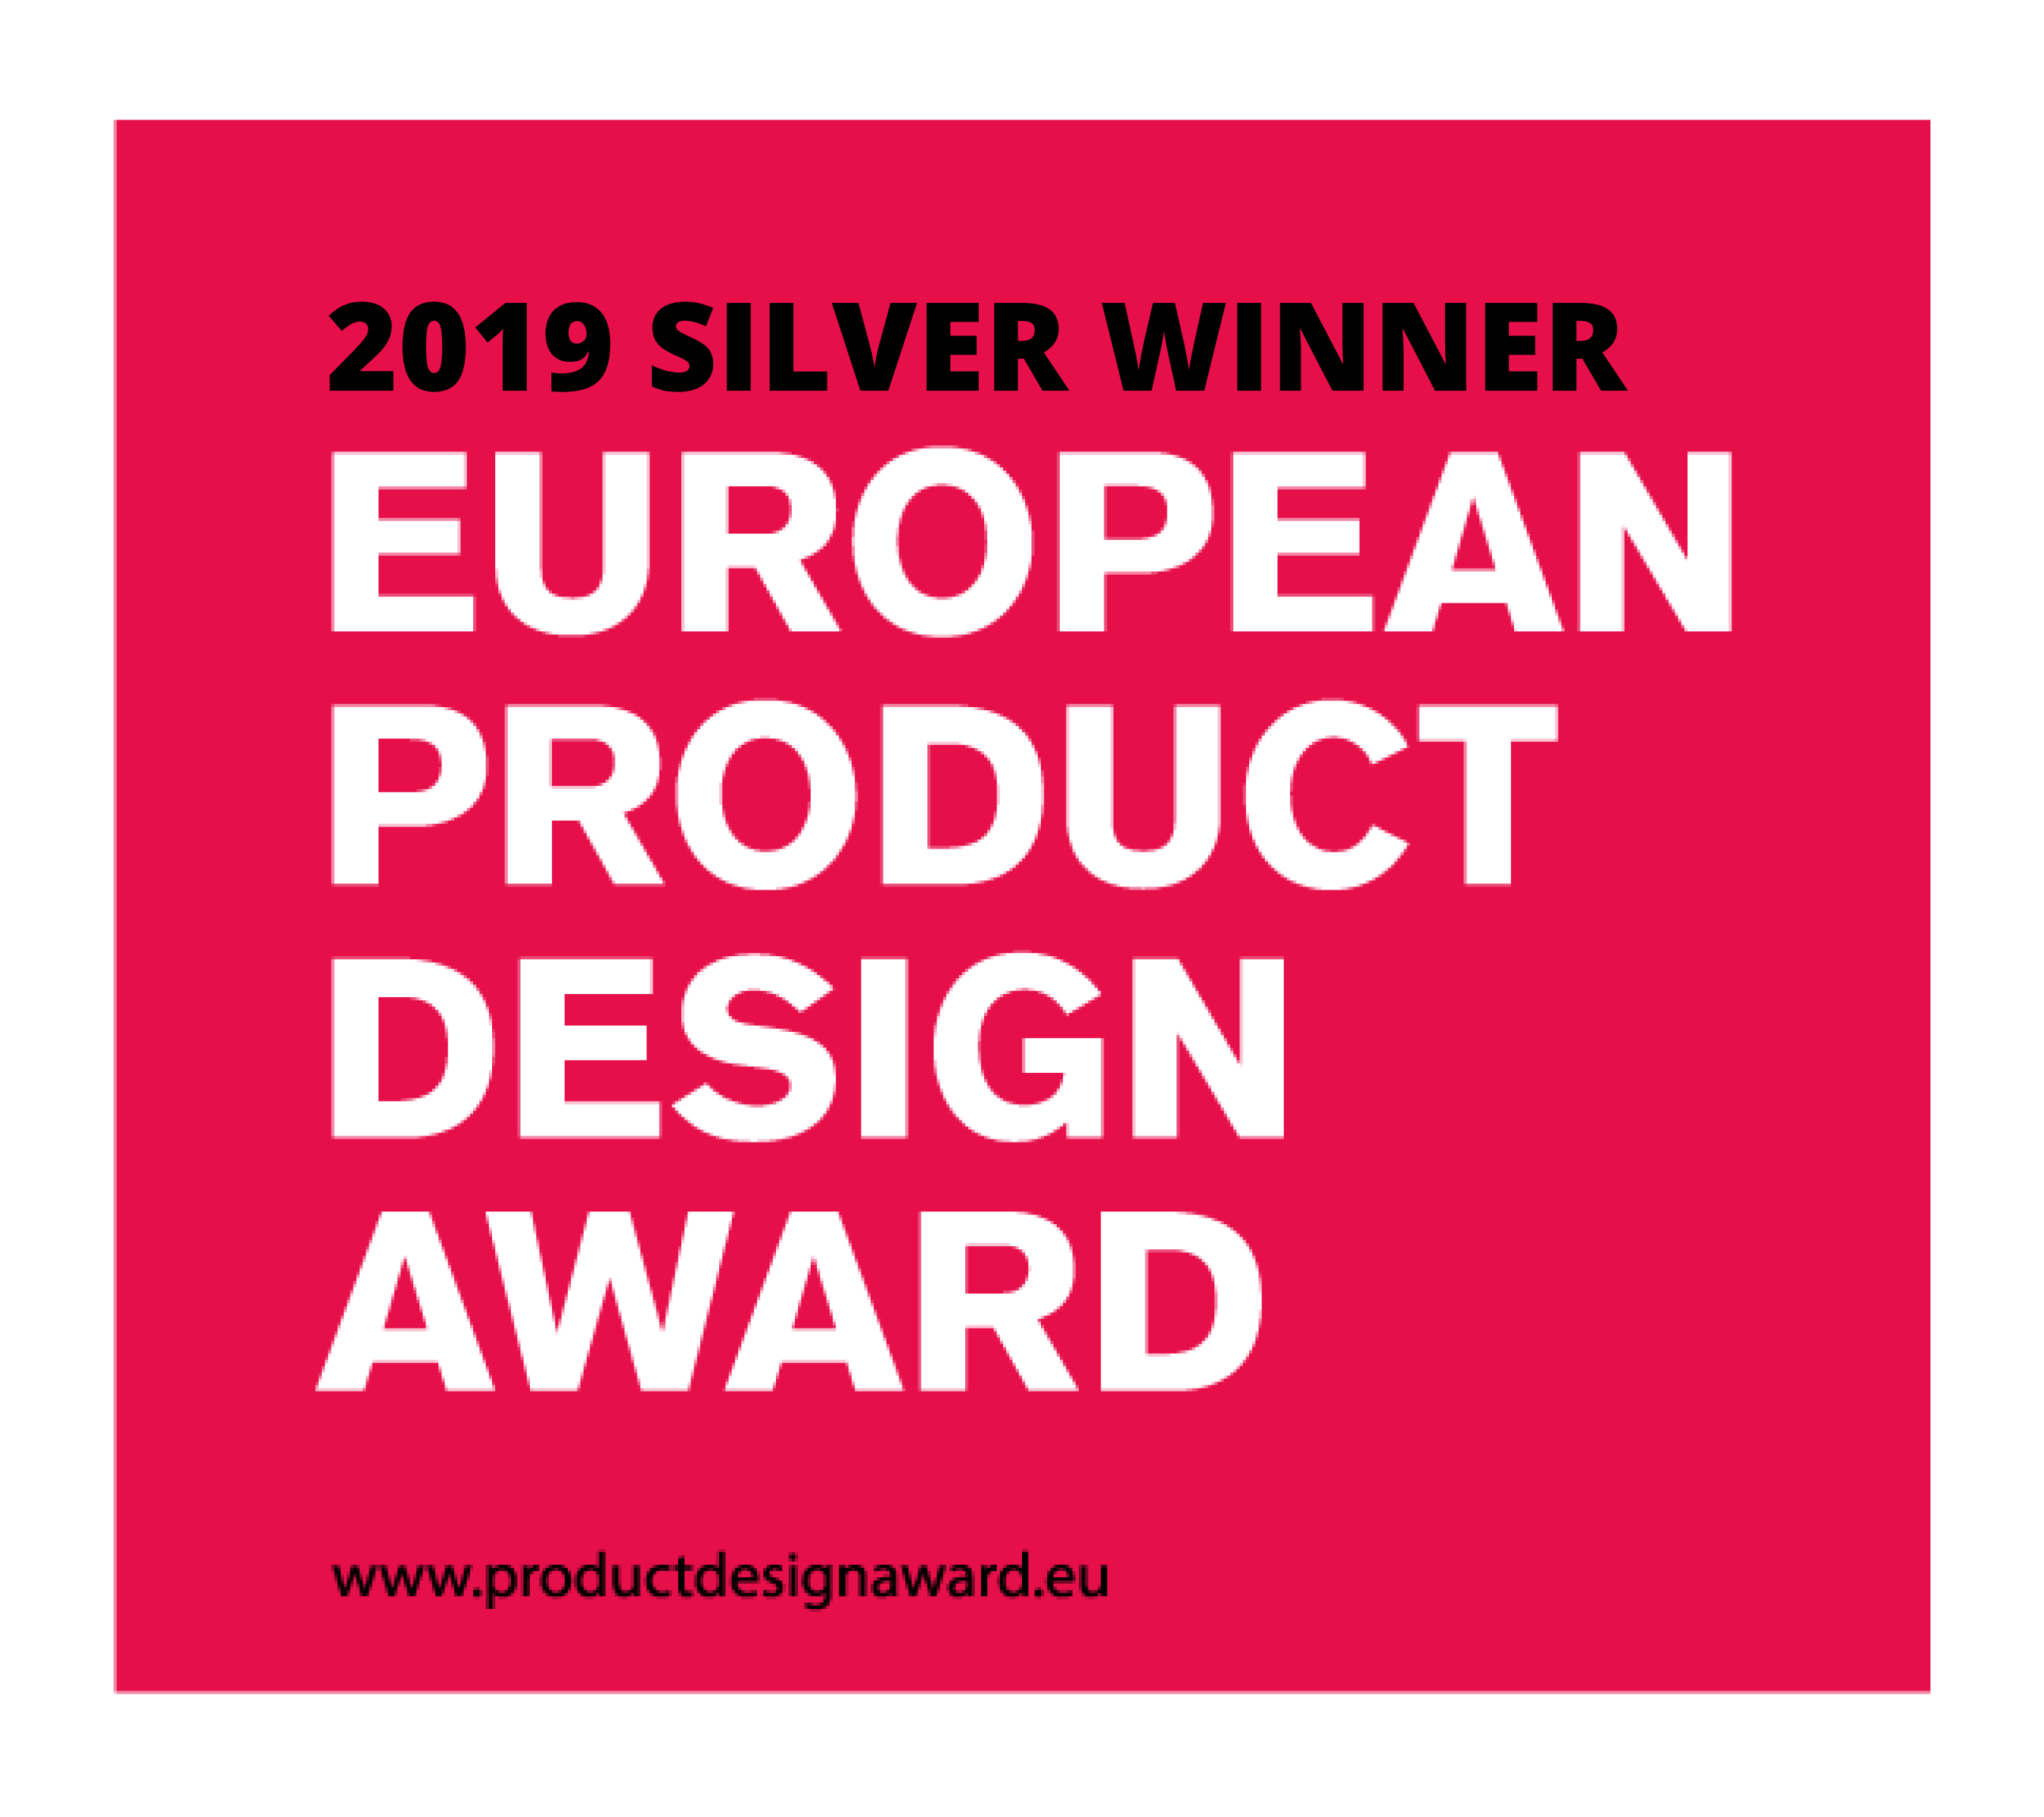 Easy Walk Experience awarded with European Product Design